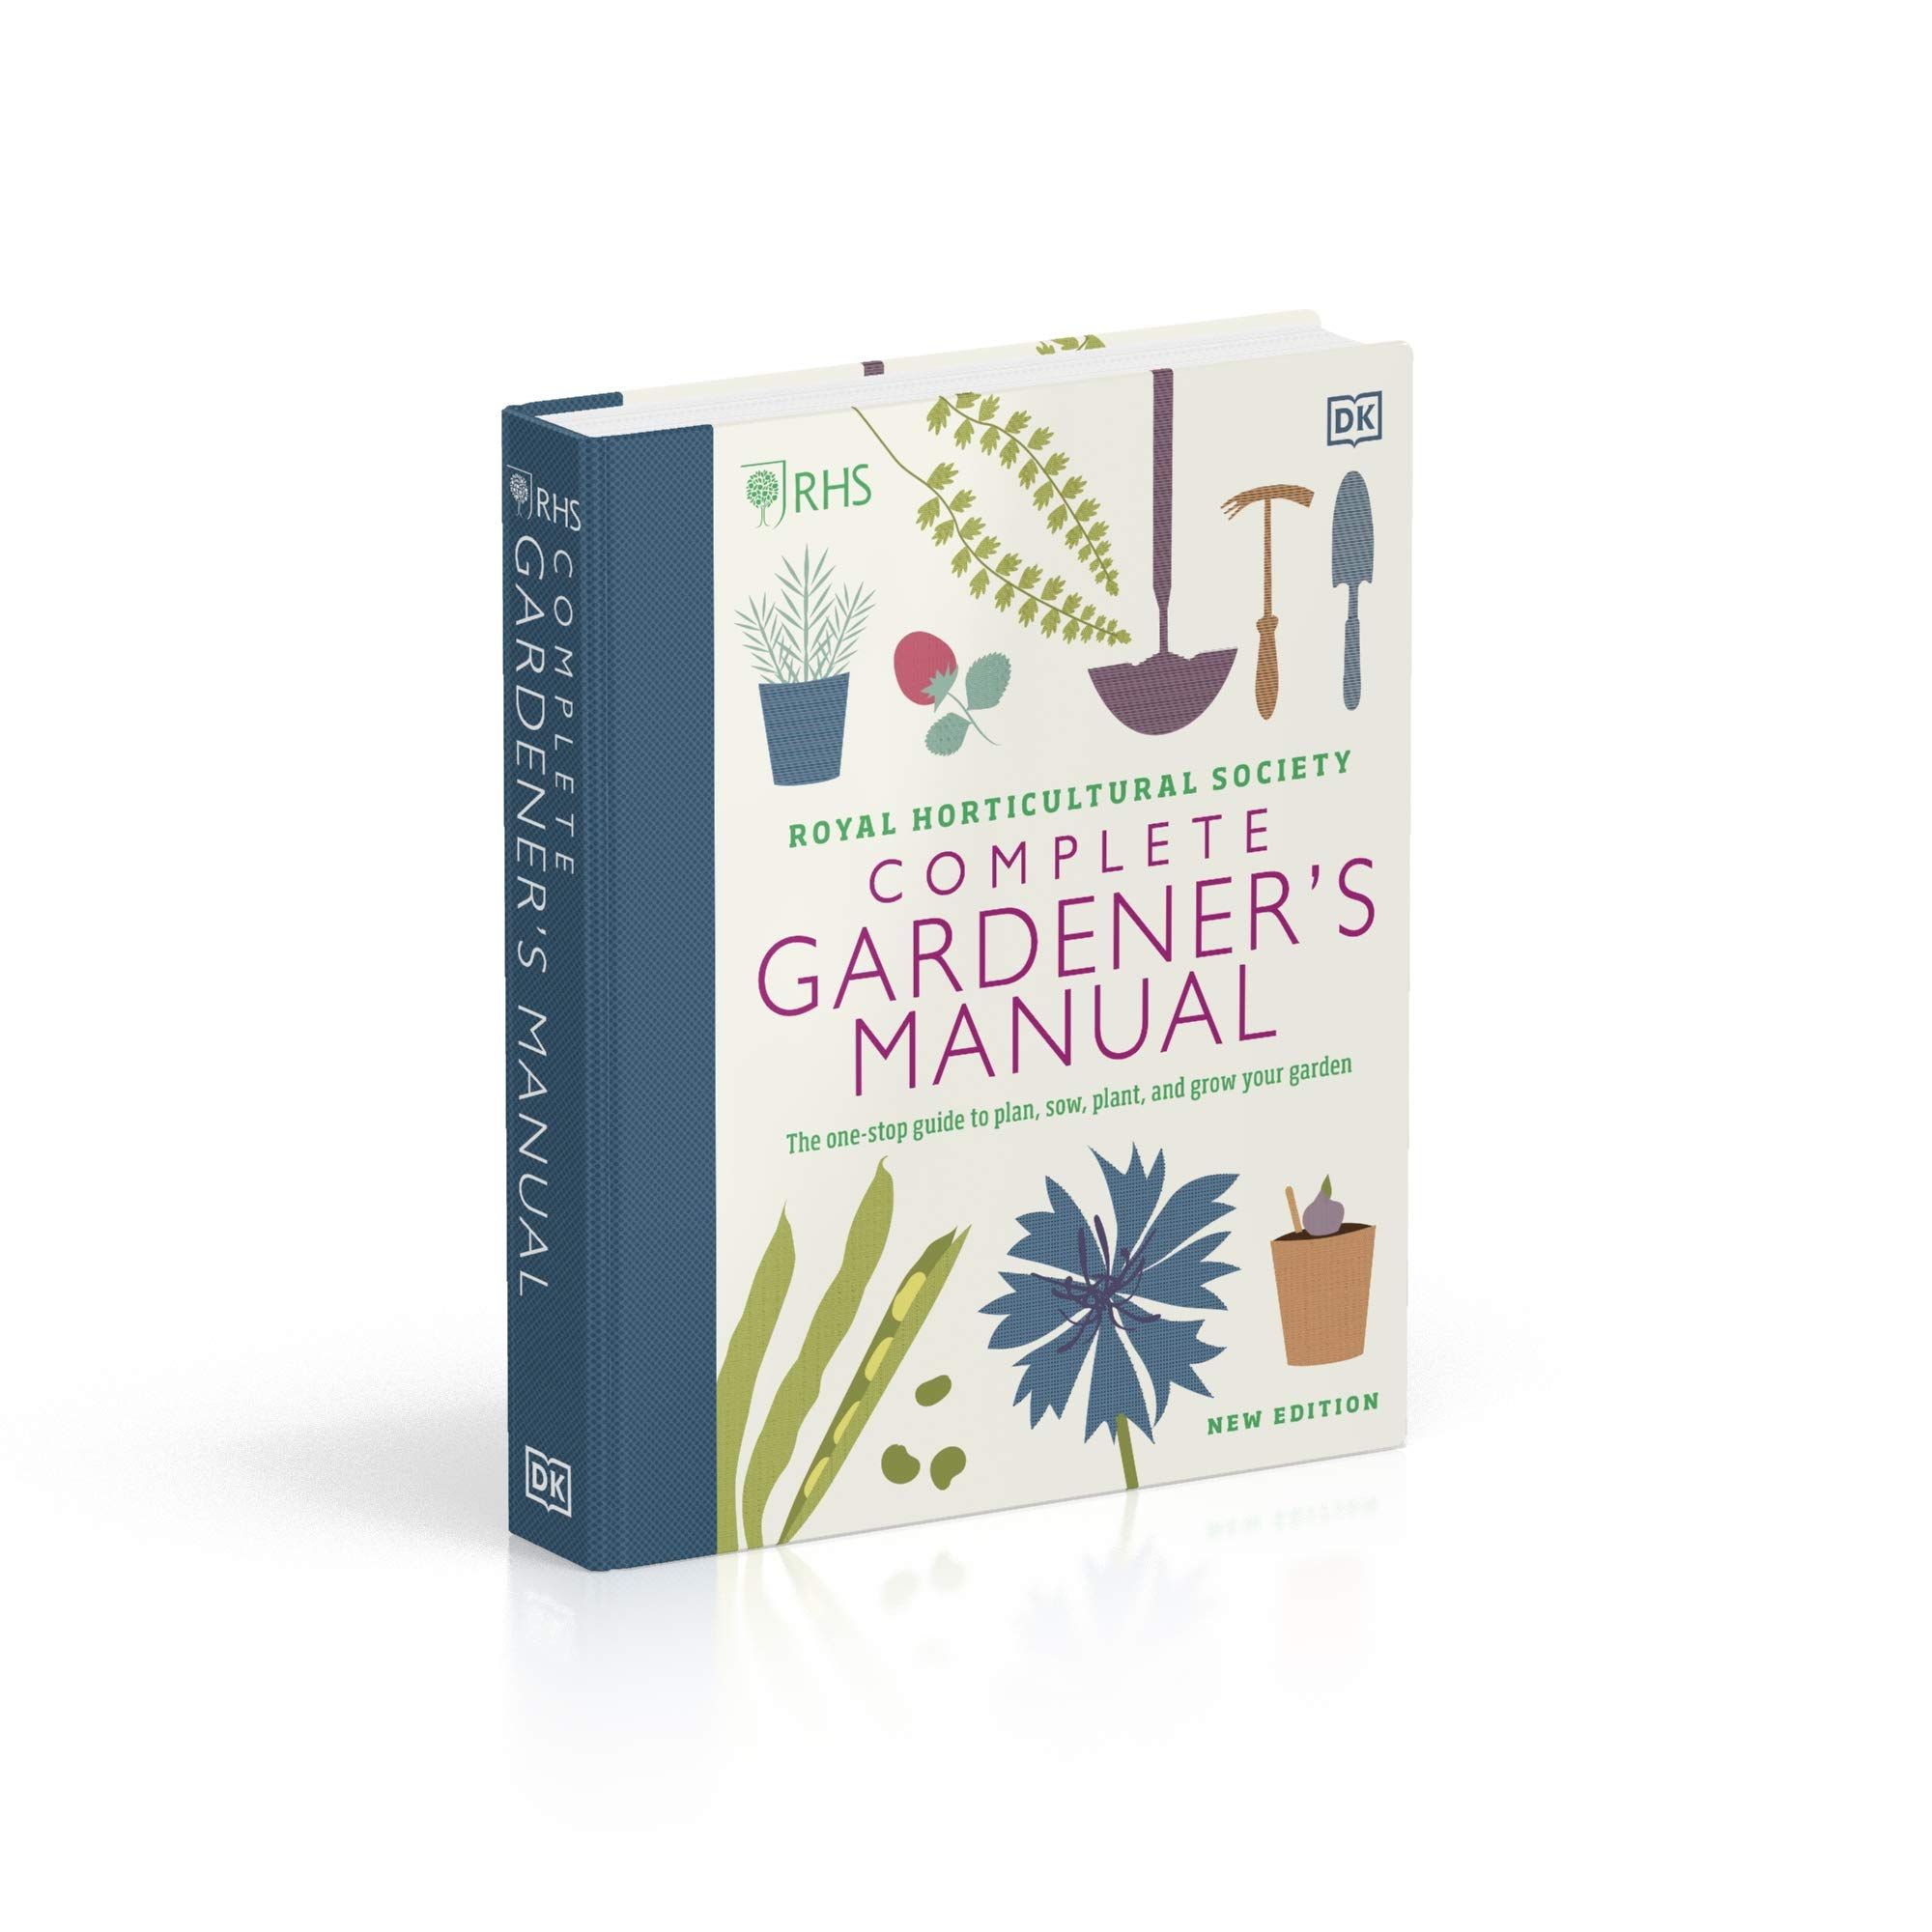  RHS Complete Gardener's Manual : The one-stop guide to plan, sow, plant, and grow your garden_DK_9780241432433_Dorling Kindersley Ltd 